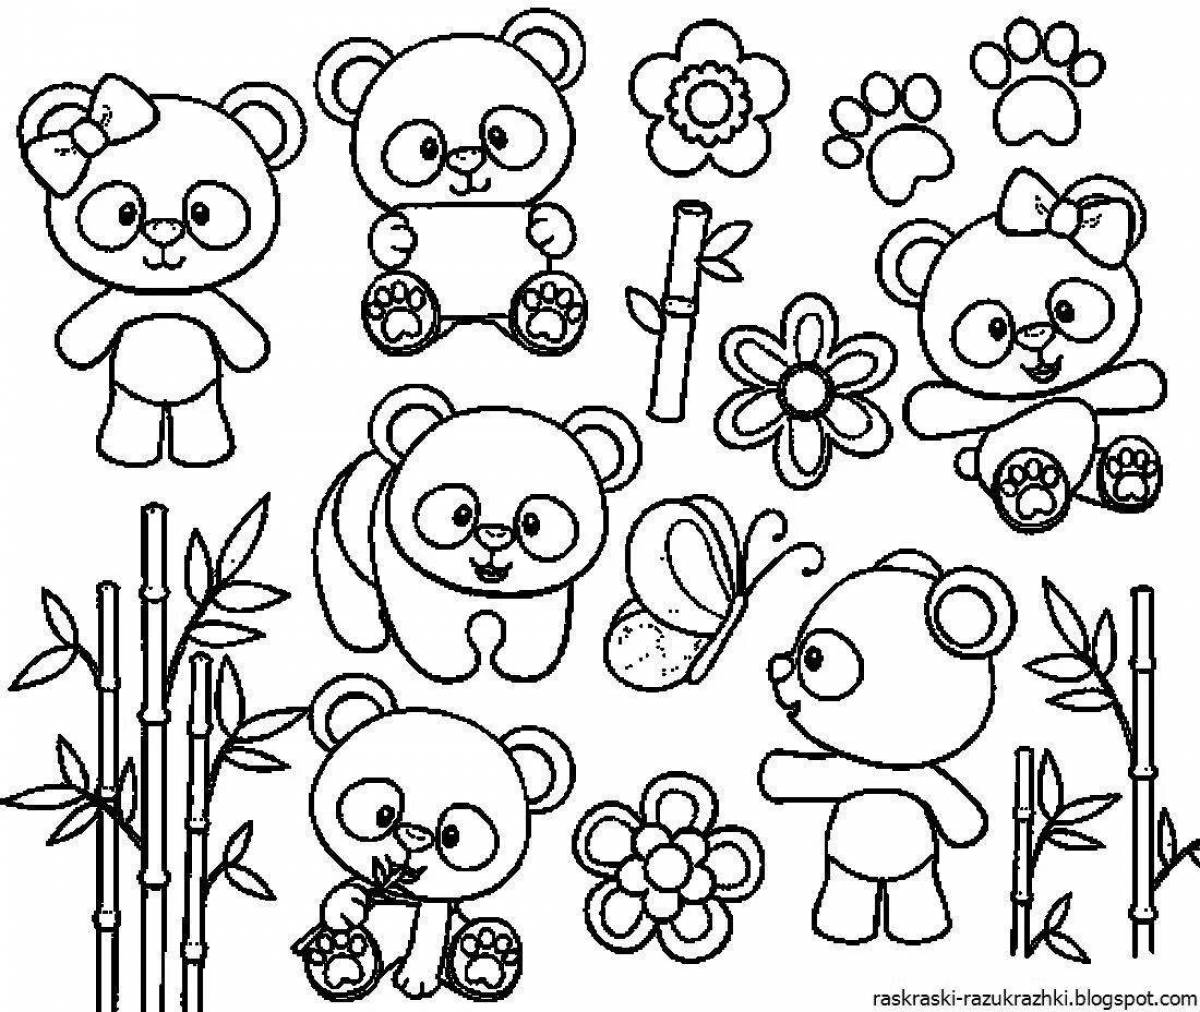 Many small coloring pages on one sheet #3